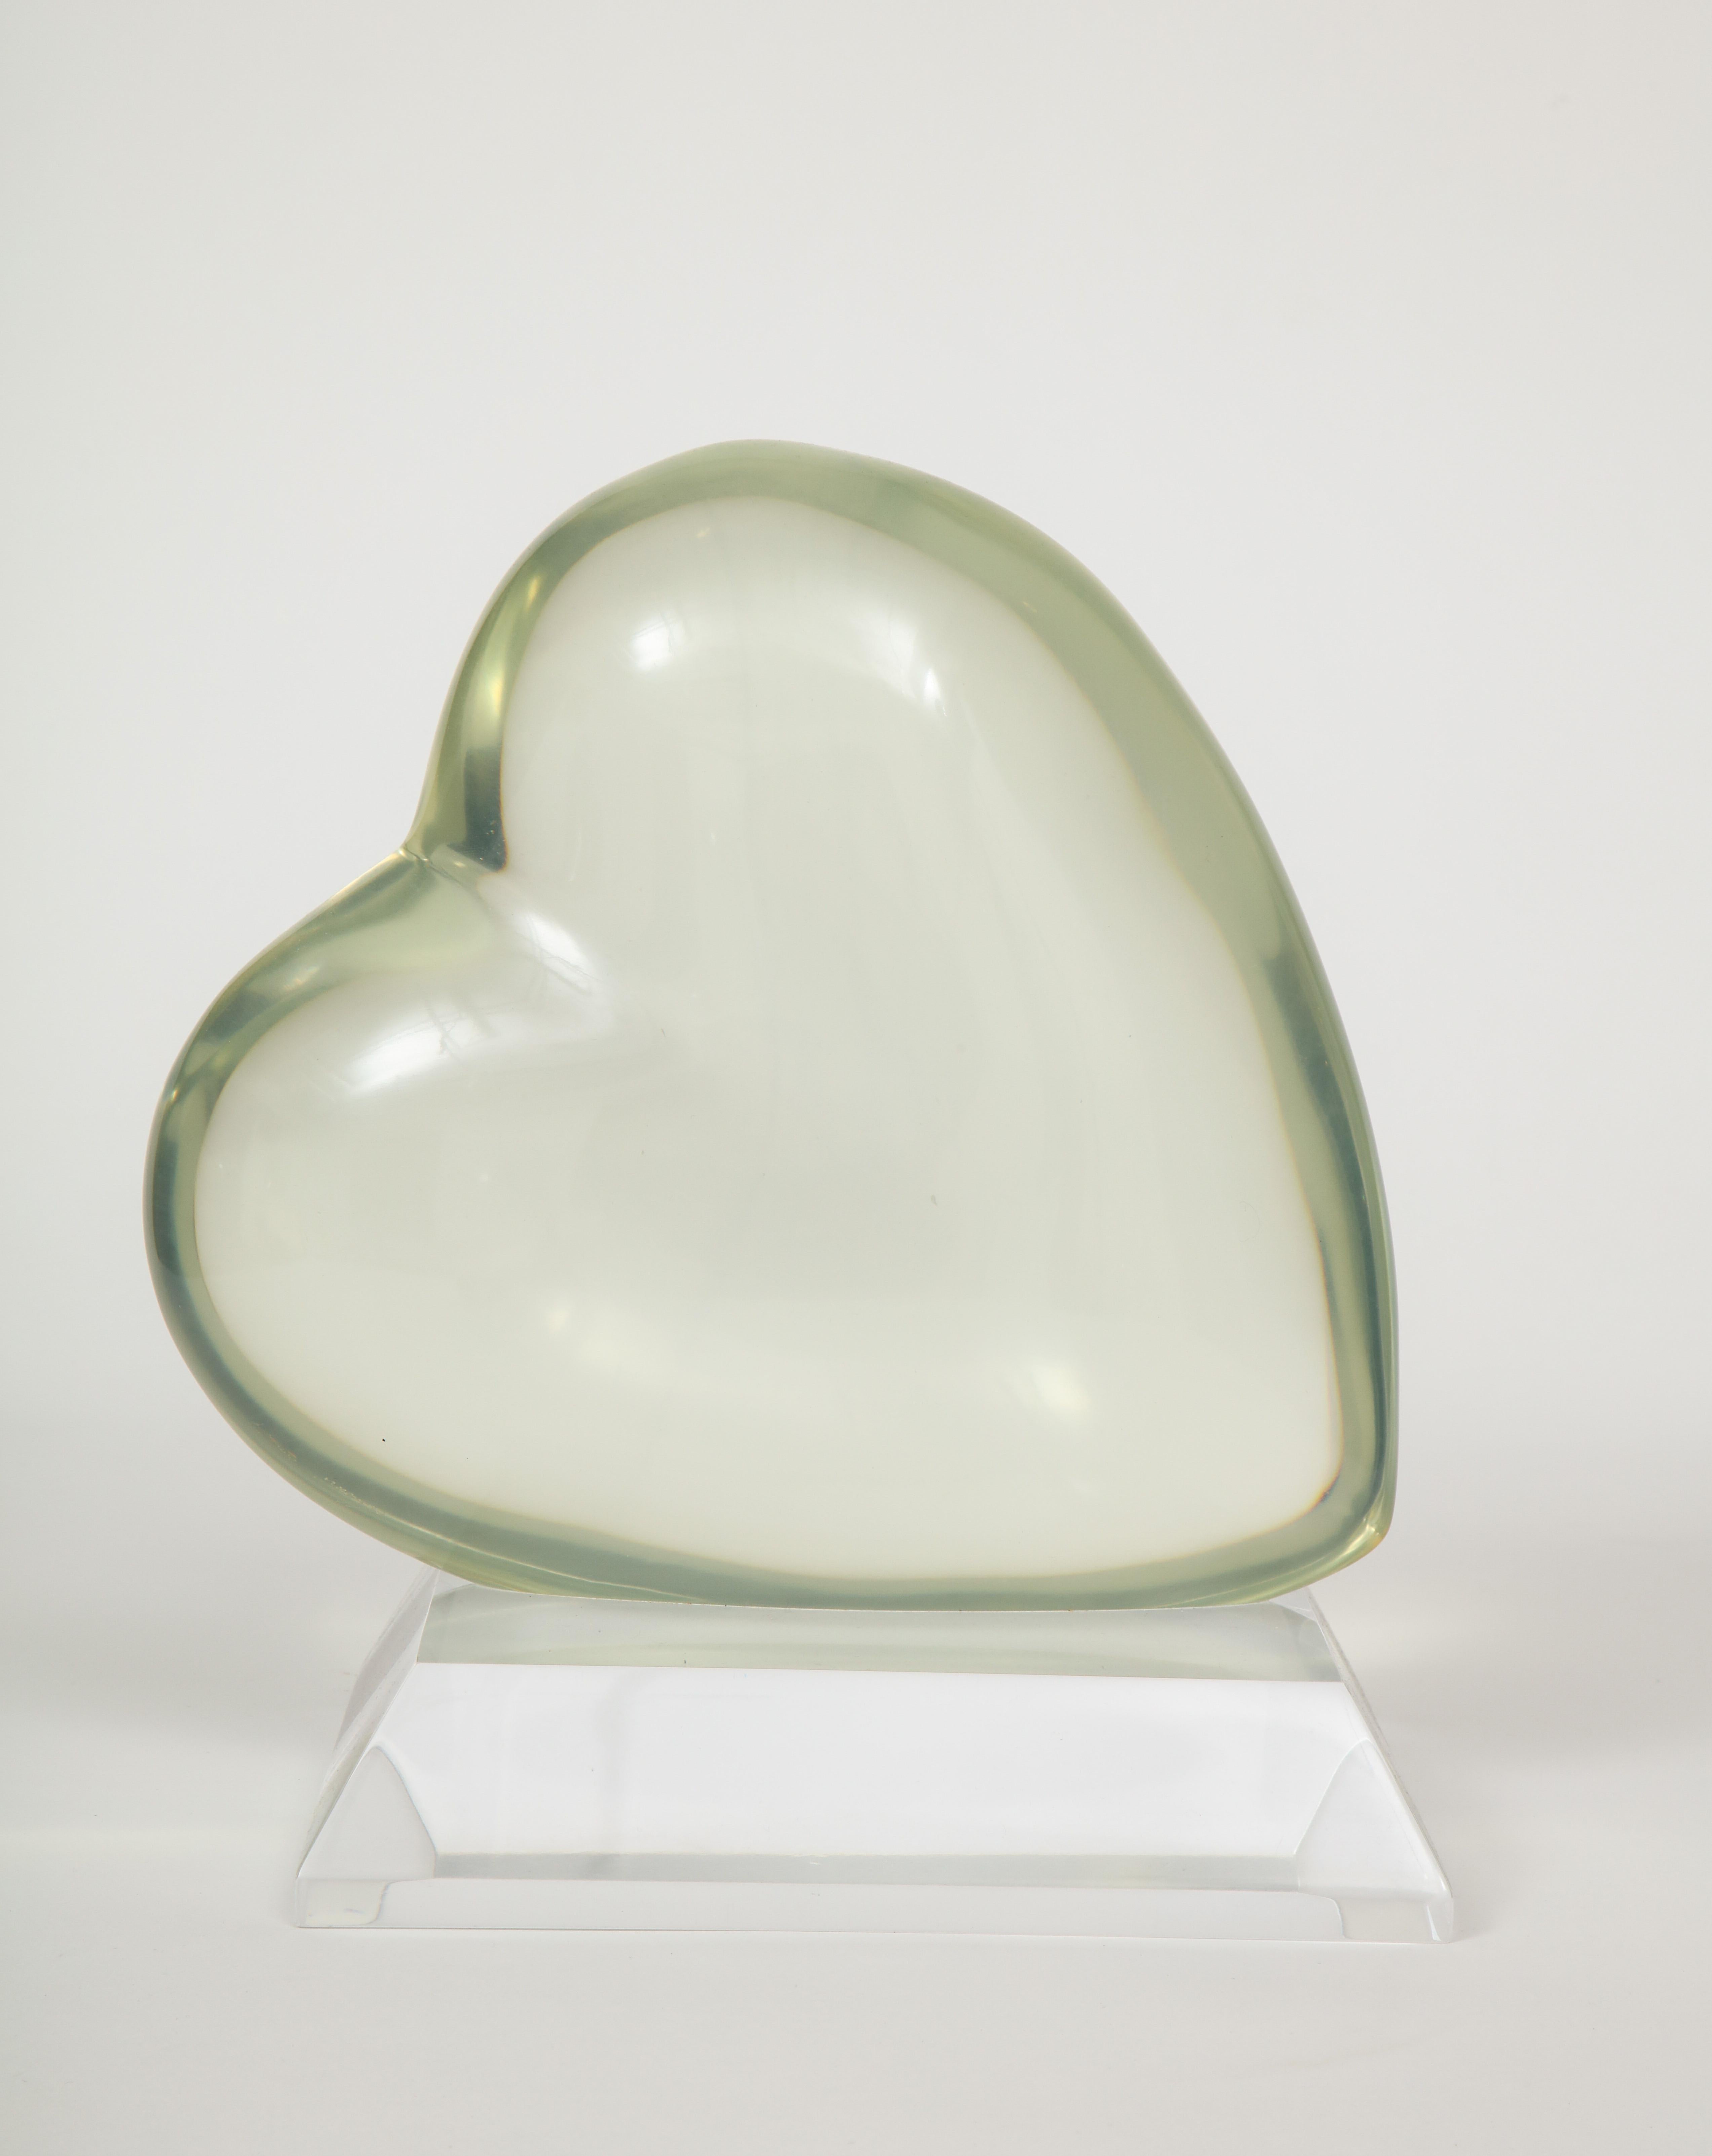 A good size Lucite heart sculpture that works well in most environments...always room for
more heart. The size of this particular sculpture is exceptional as the smaller ones are more available. Artist-signed.